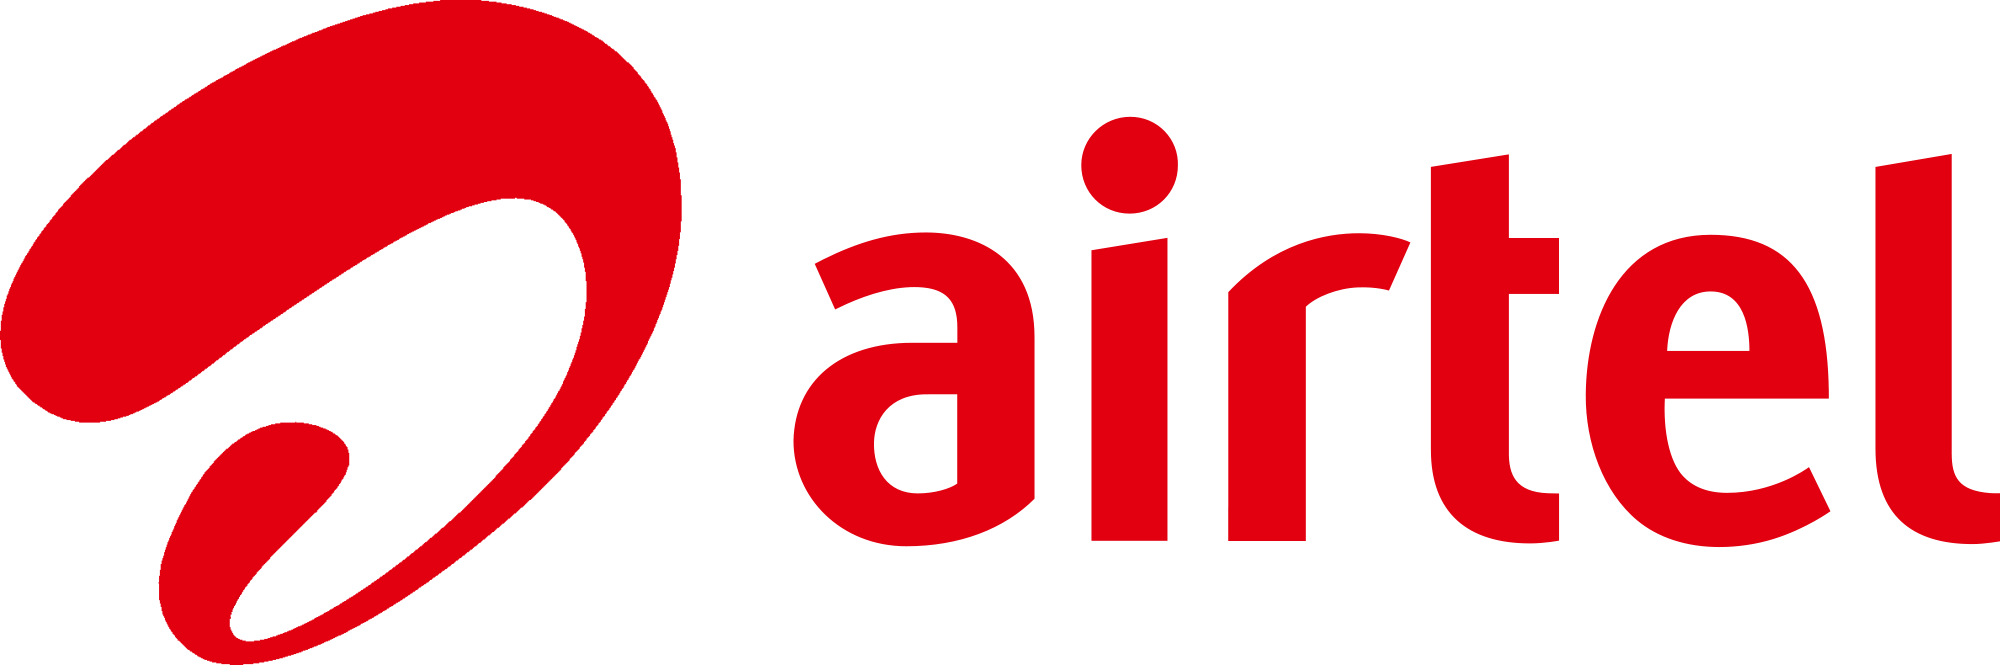 Free download airtel logo Logospikecom Famous and Vector Logos [2000x665] for your Desktop, Mobile & Tablet. Explore Airtel Wallpaper. Airtel Wallpaper